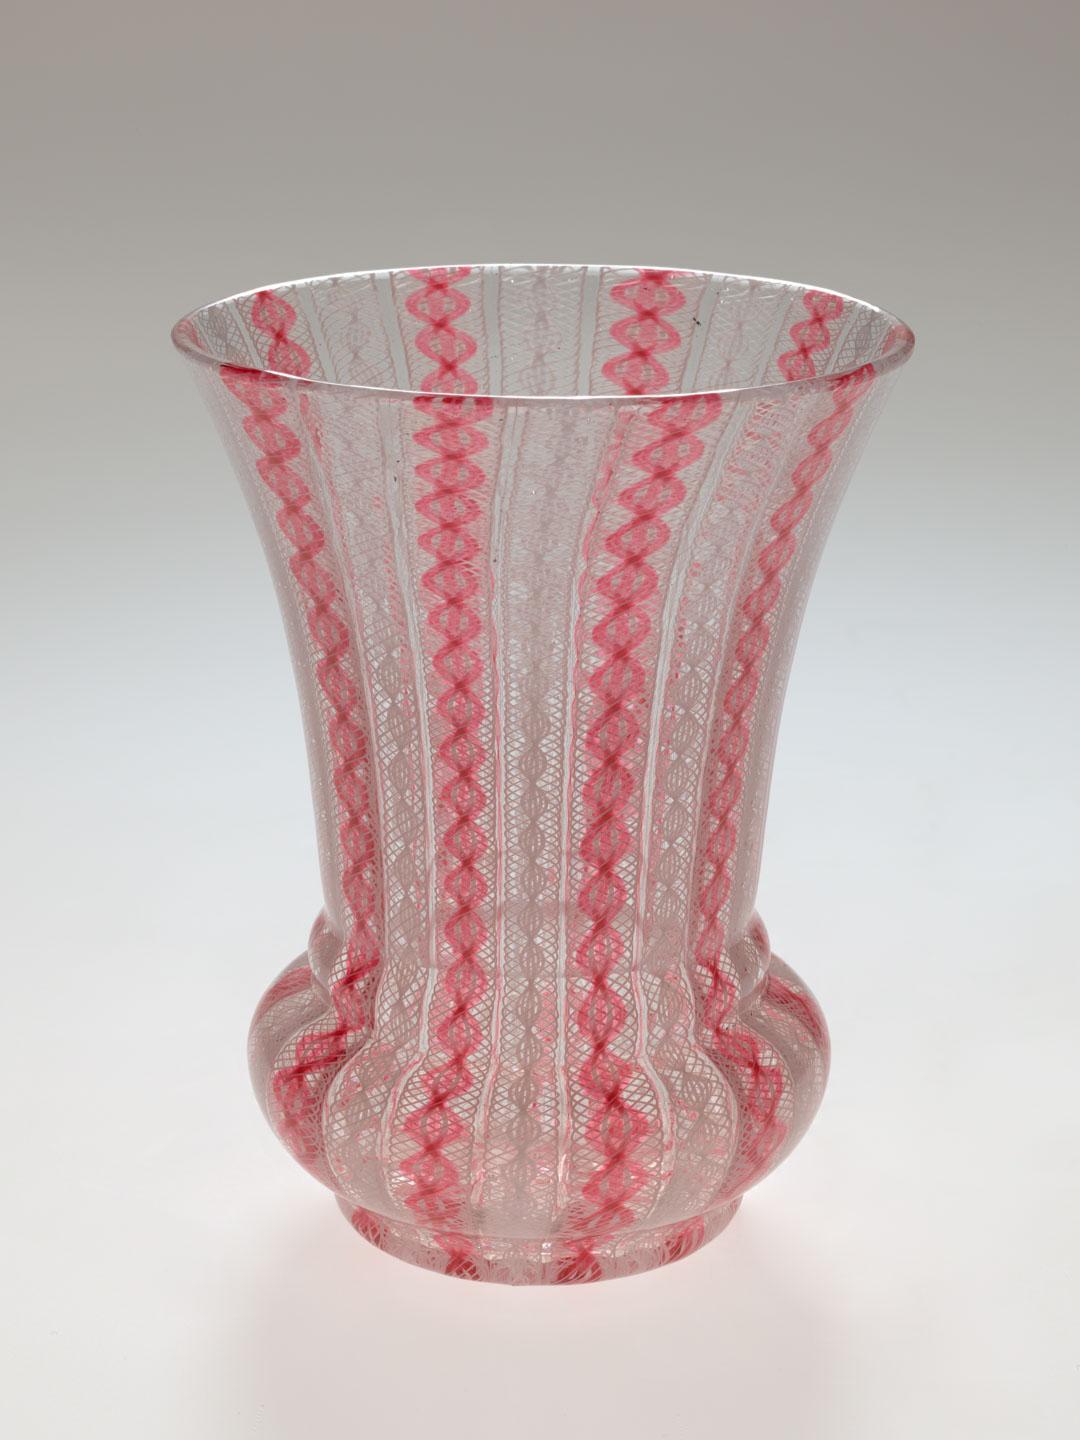 Artwork Beaker this artwork made of Clear glass with pink and white twisted latticino glass, created in 1840-01-01